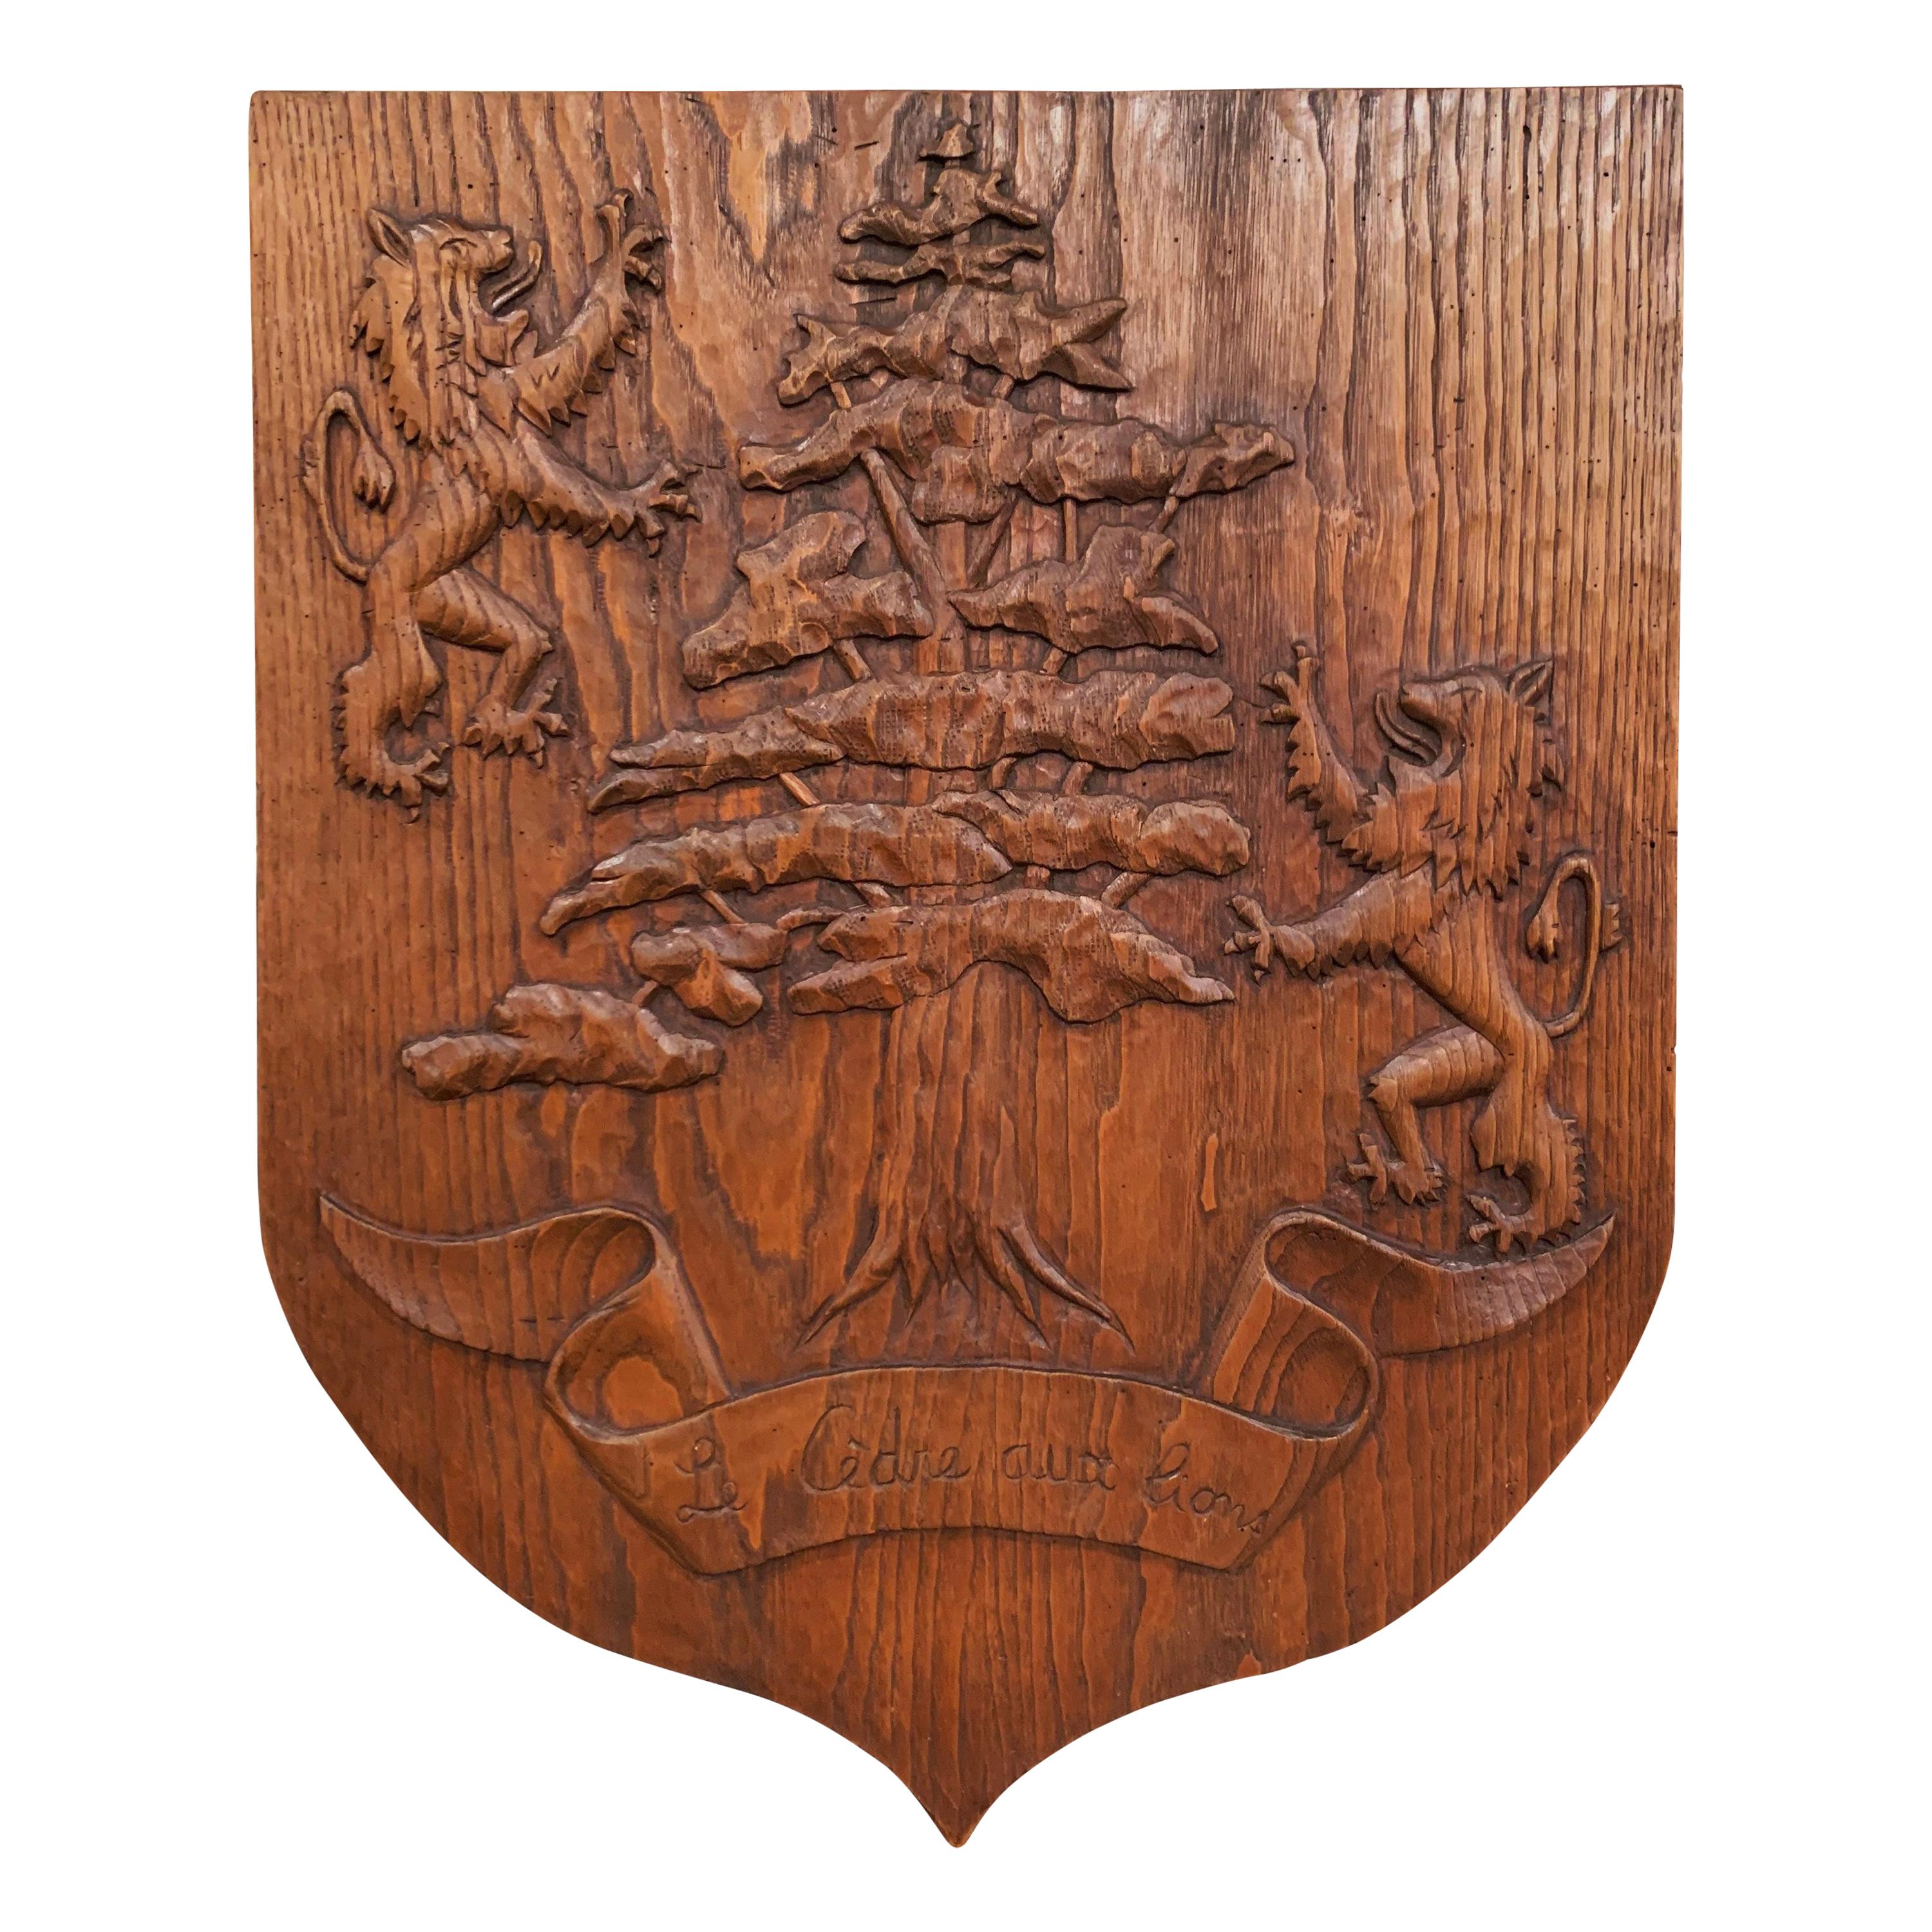 Early 20th Century French Carved Oak Shield Titled "Le Cedre aux Lions"